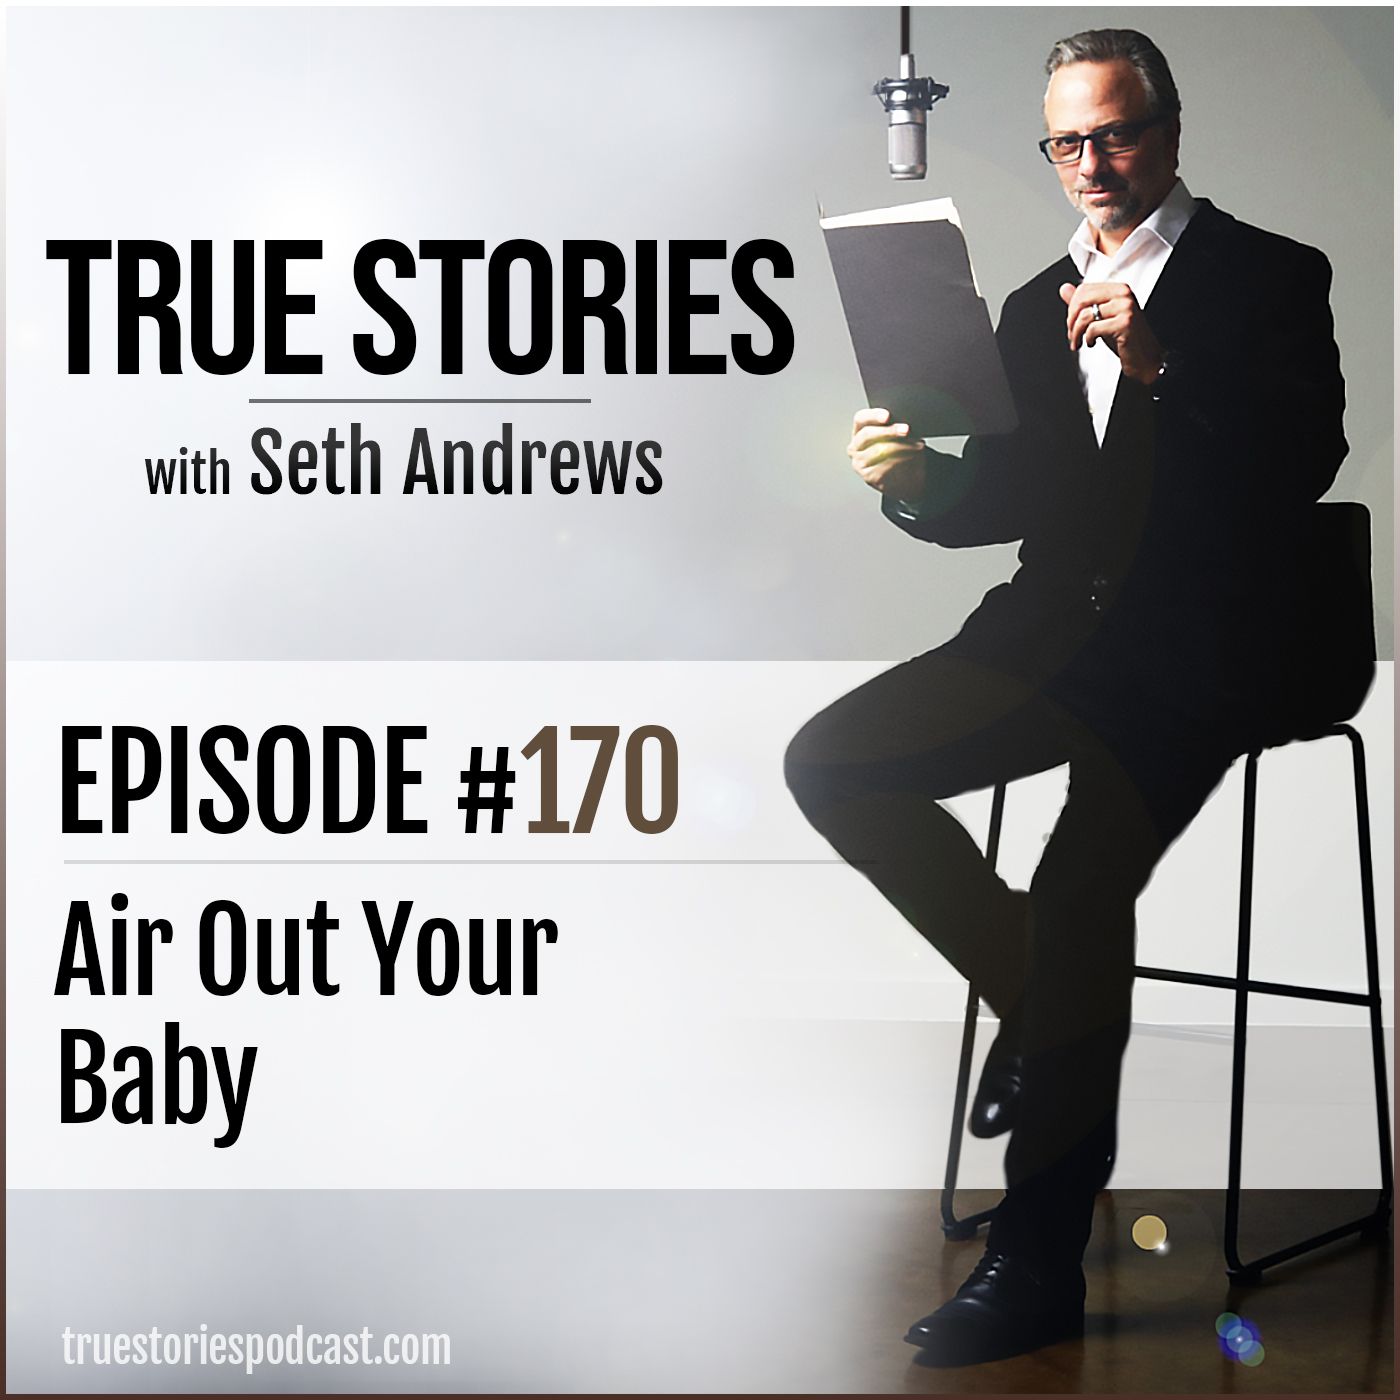 True Stories #170 - Air Out Your Baby